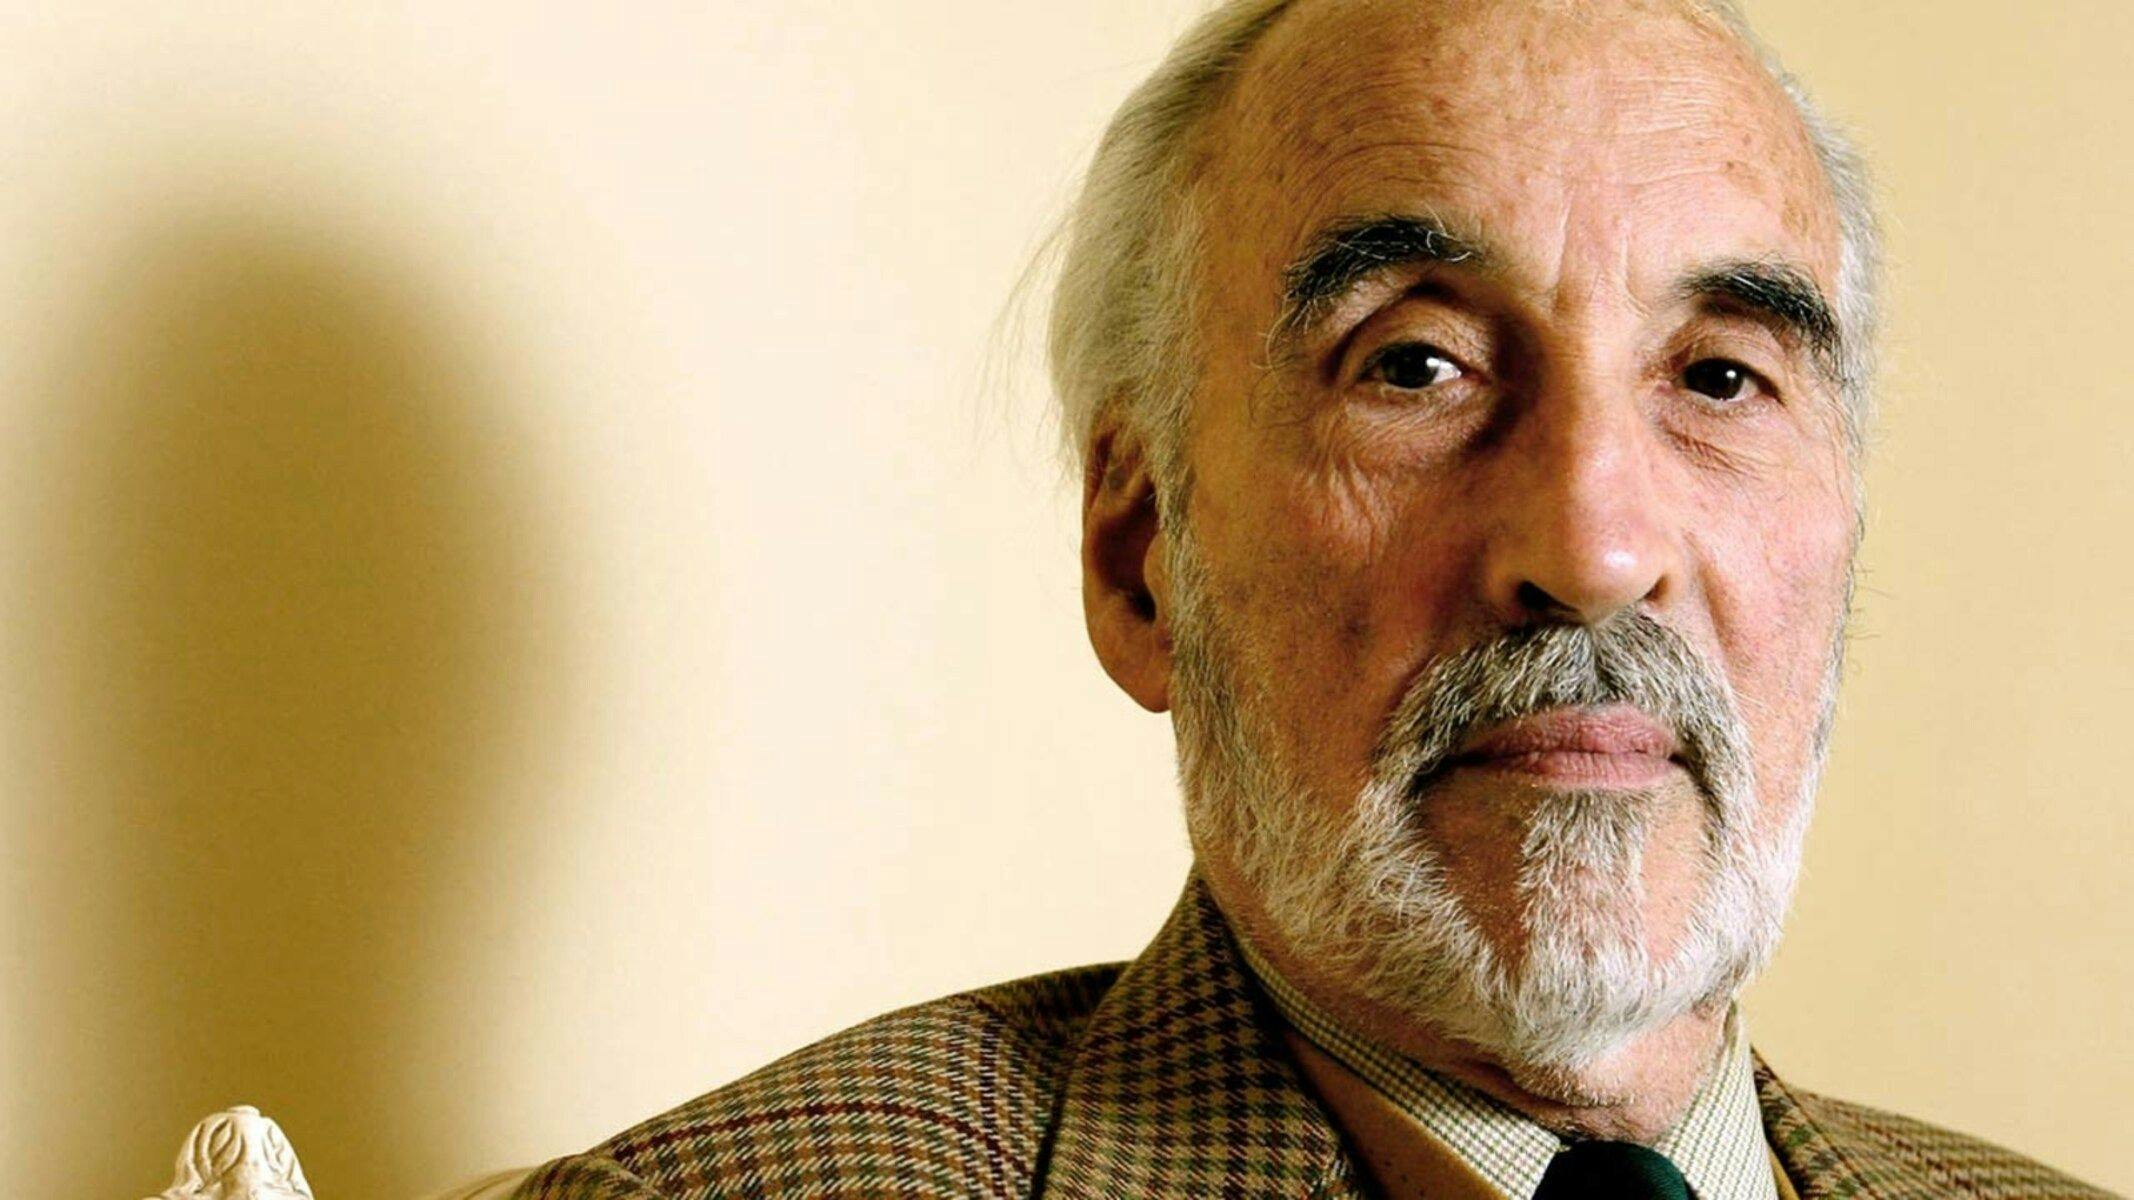 Christopher Lee Personality type